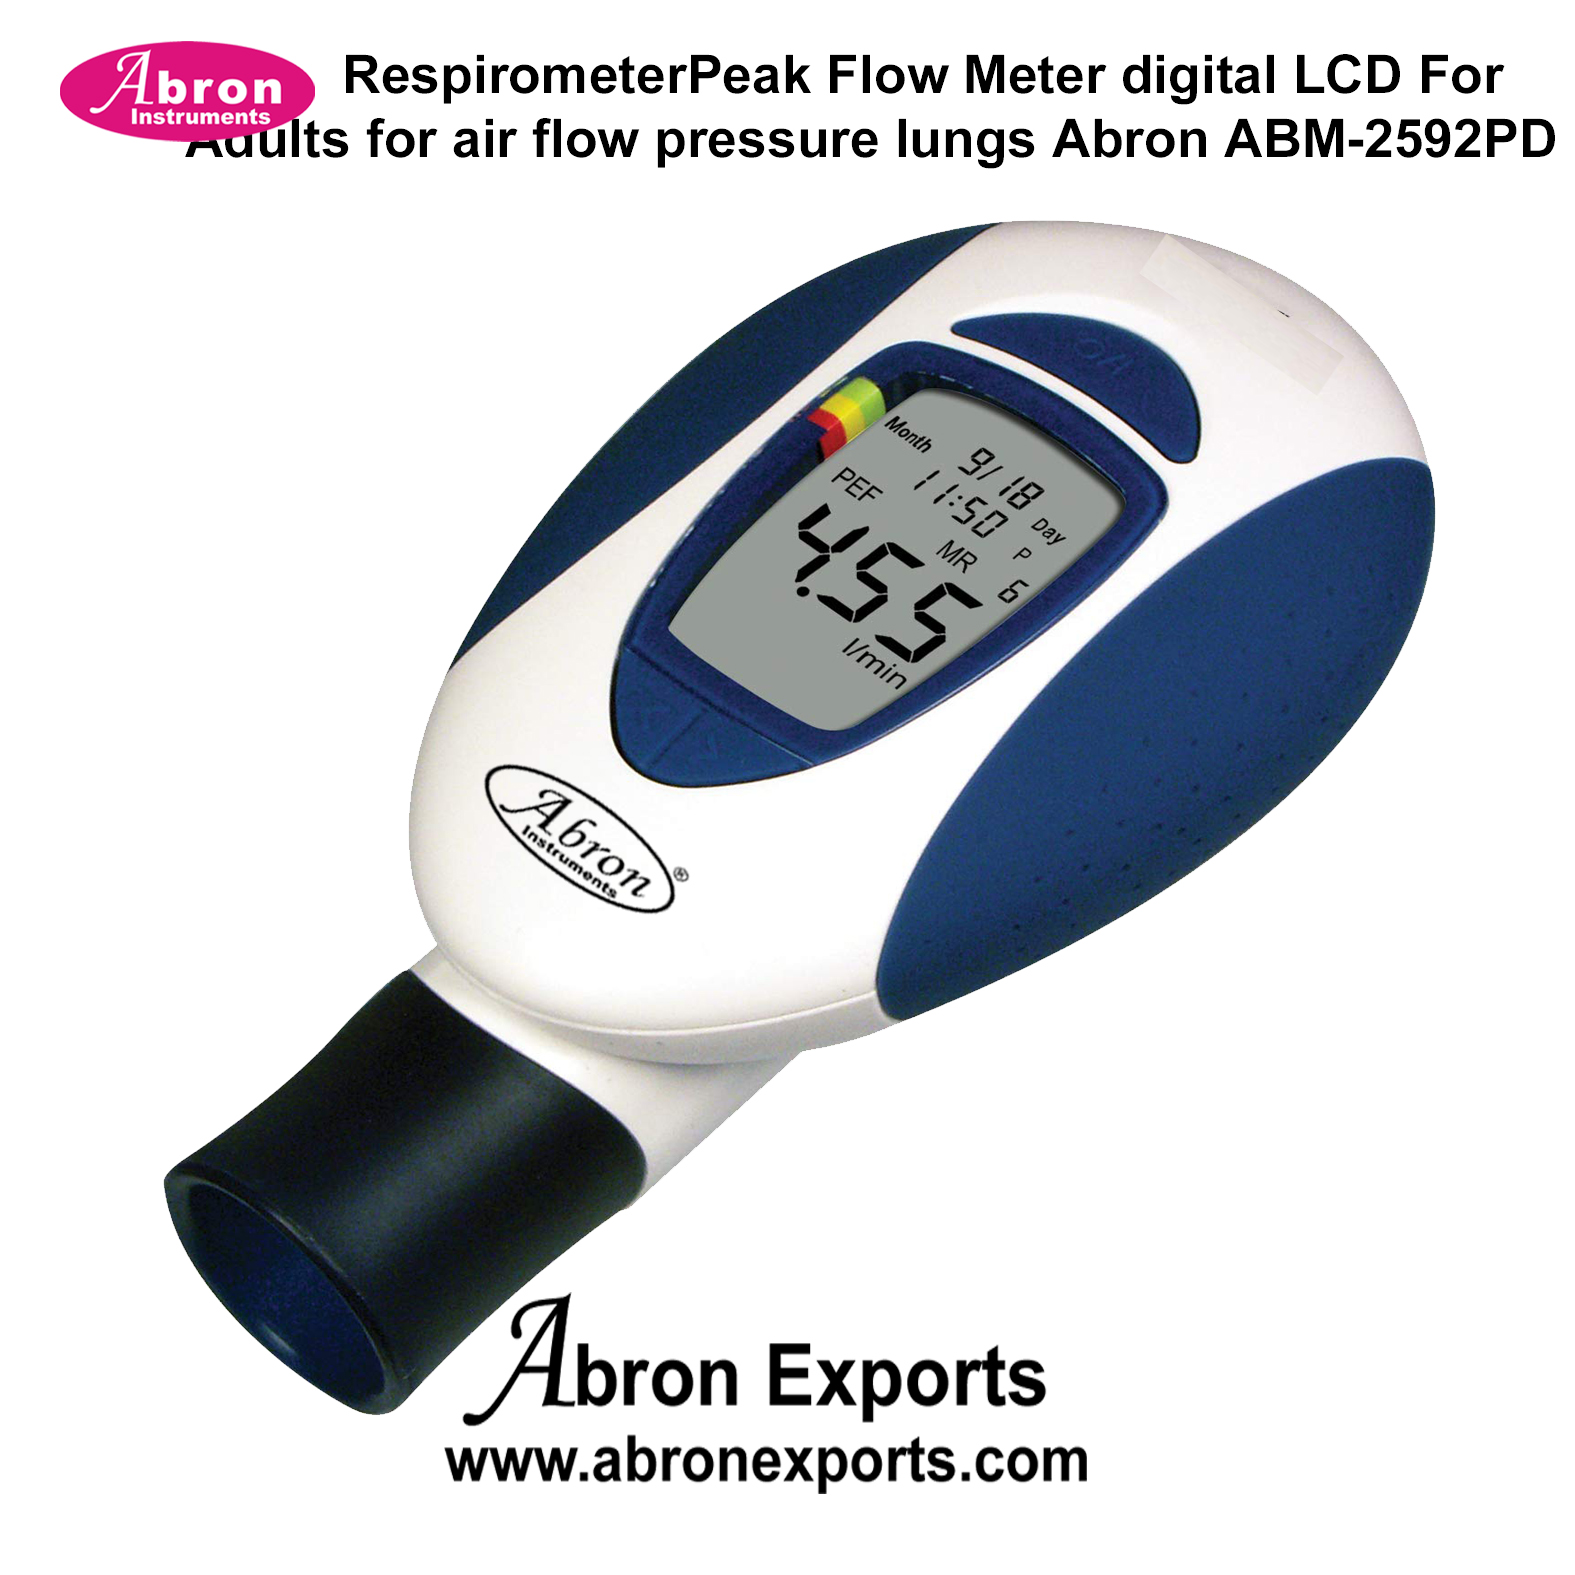 Respirometer Peak Flow Meter Digital LCD for Adults For Air Flow Pressure Lungs Abron ABM-2592PD 